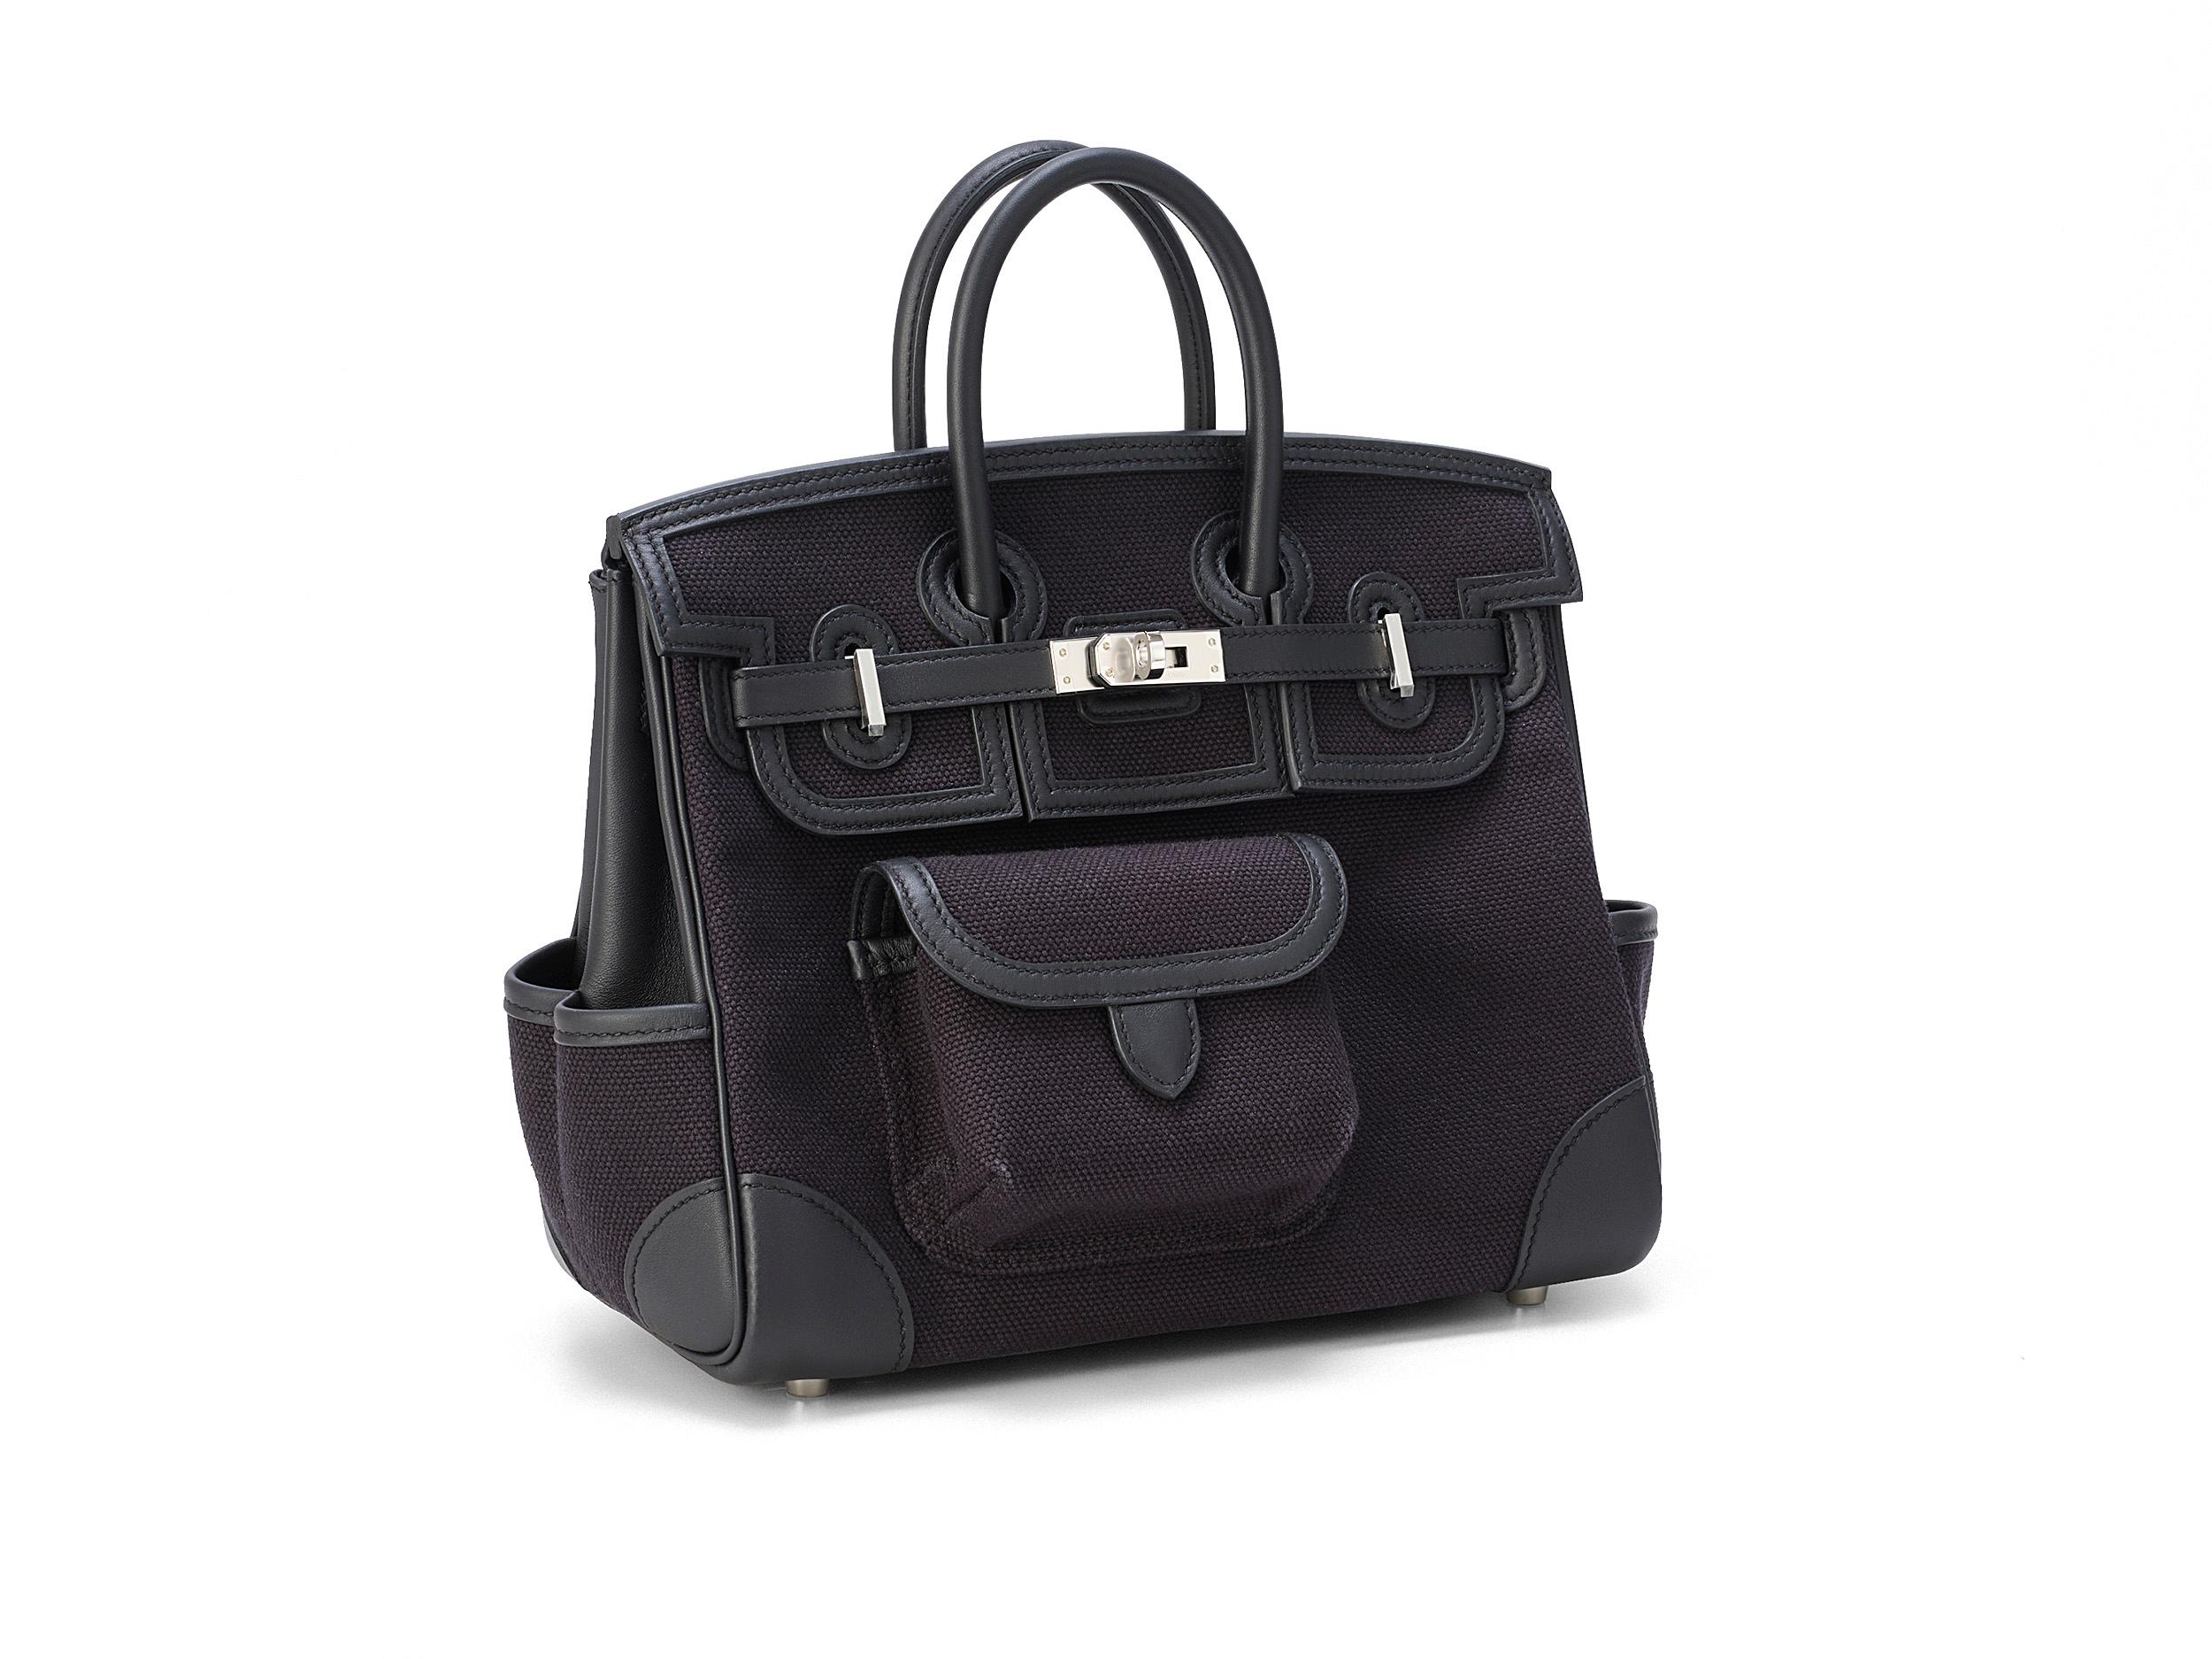 Hermès Birkin Cargo 25 in noir and canvas swift leather with palladium hardware. The bag is unworn and comes as full set with the original receipt.

Stamp U (2022) 

